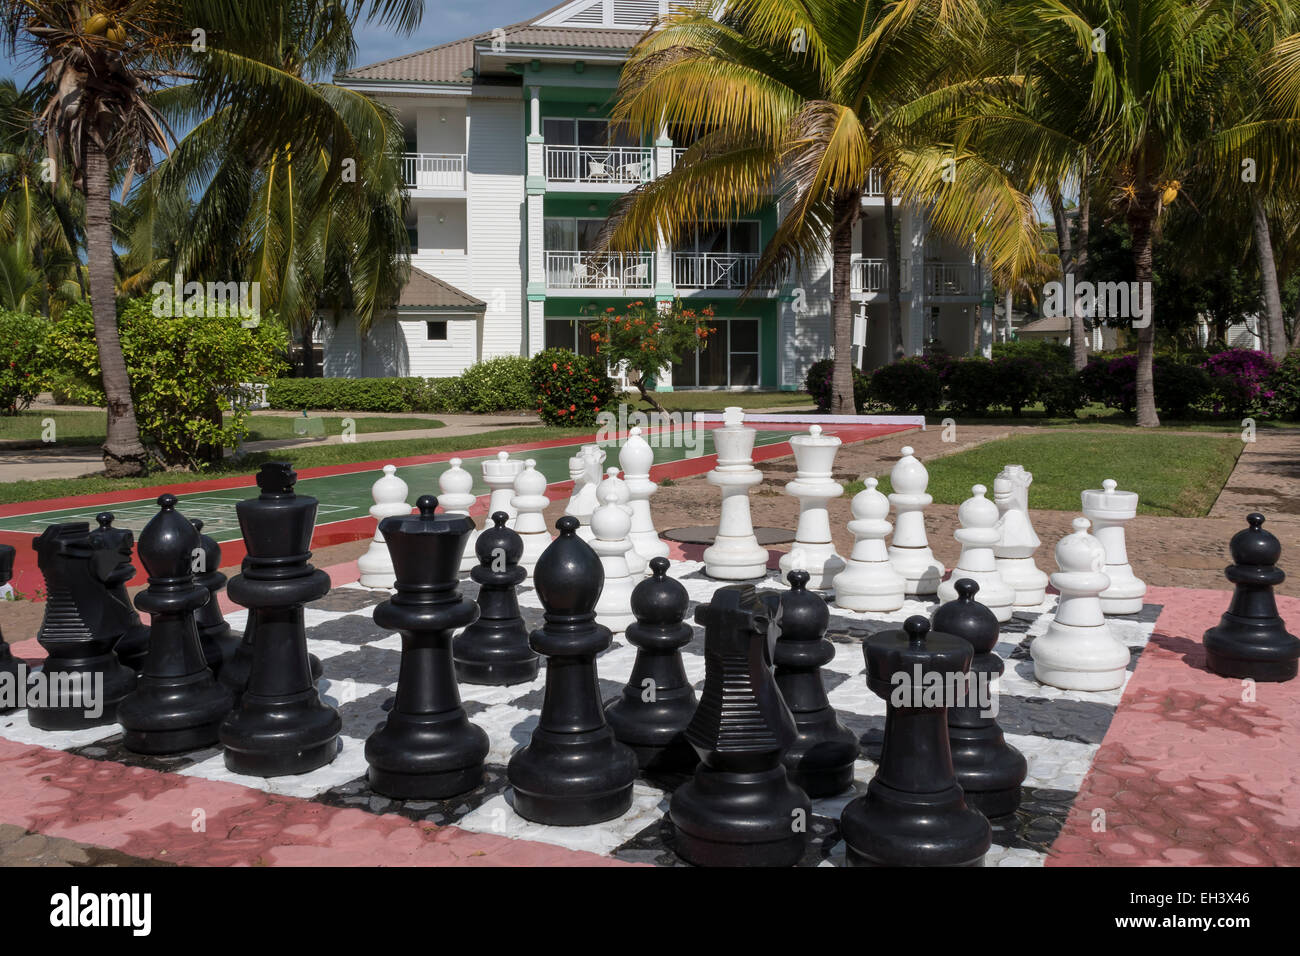 Quintessence Hotel Anguilla - Our giant chess board is a favorite amongst  guest. The easy to move pieces allow for strategic thinking and a way to  disconnect from the digital World with